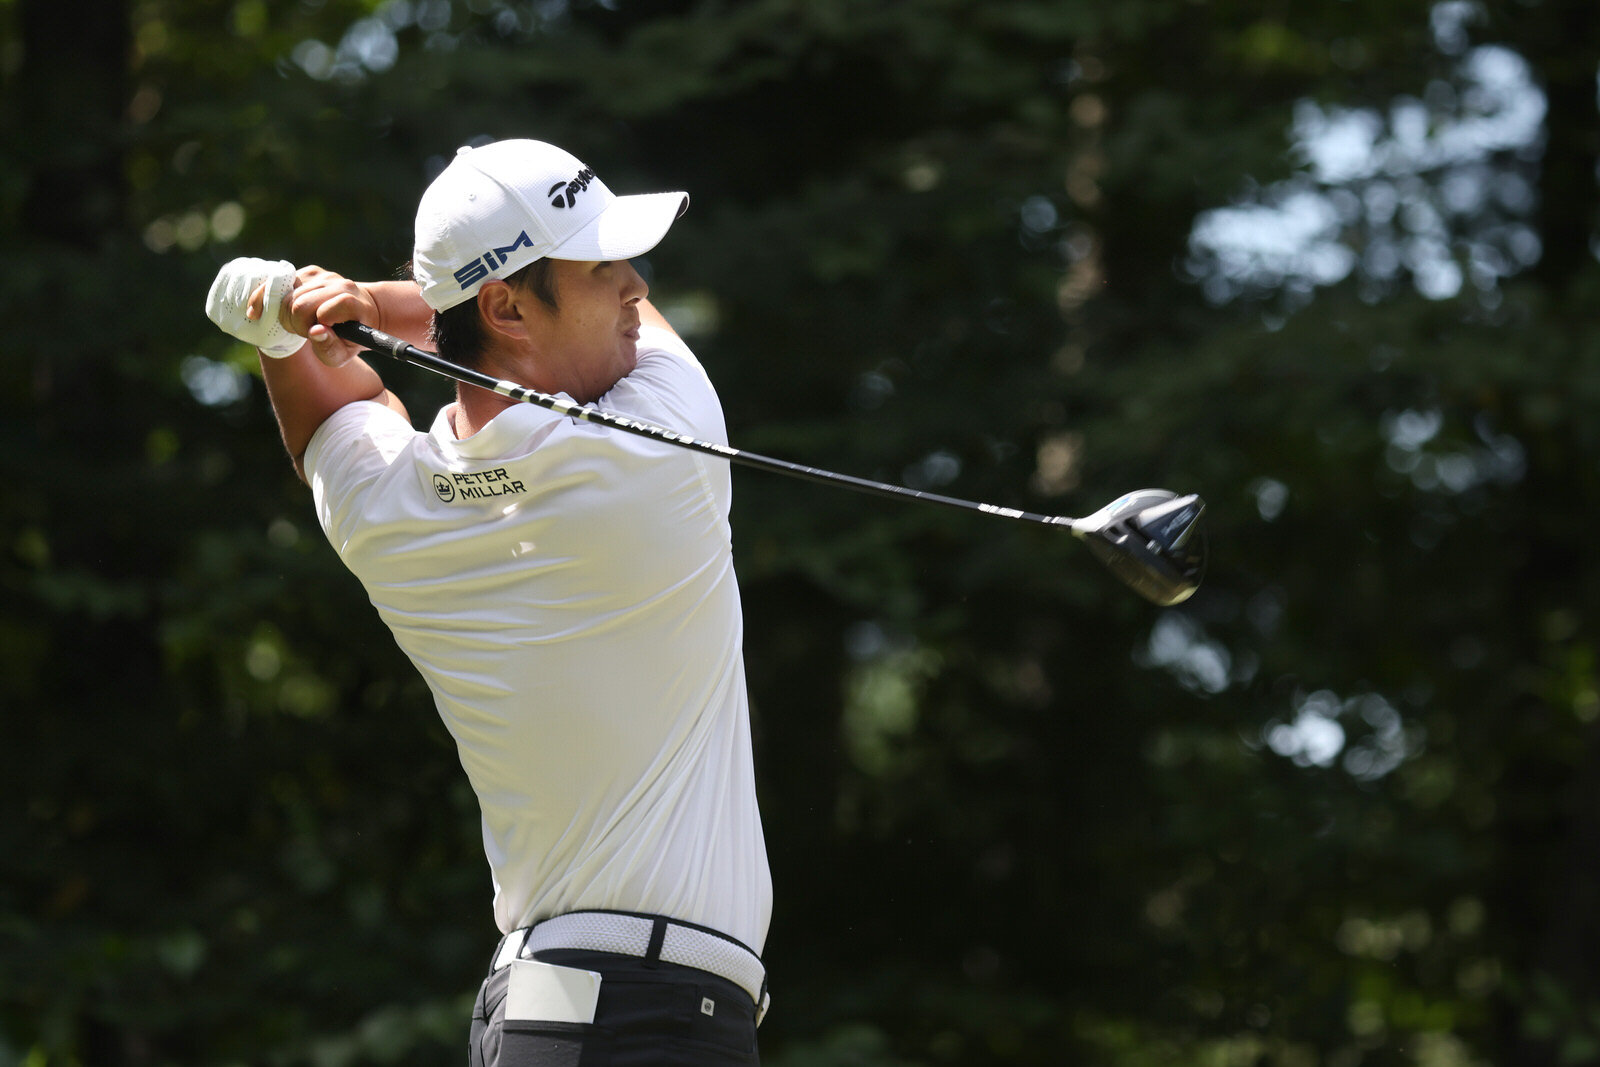  NORTON, MASSACHUSETTS - AUGUST 21: Danny Lee of New Zealand plays his shot from the ninth tee during the second round of The Northern Trust at TPC Boston on August 21, 2020 in Norton, Massachusetts. (Photo by Rob Carr/Getty Images) 